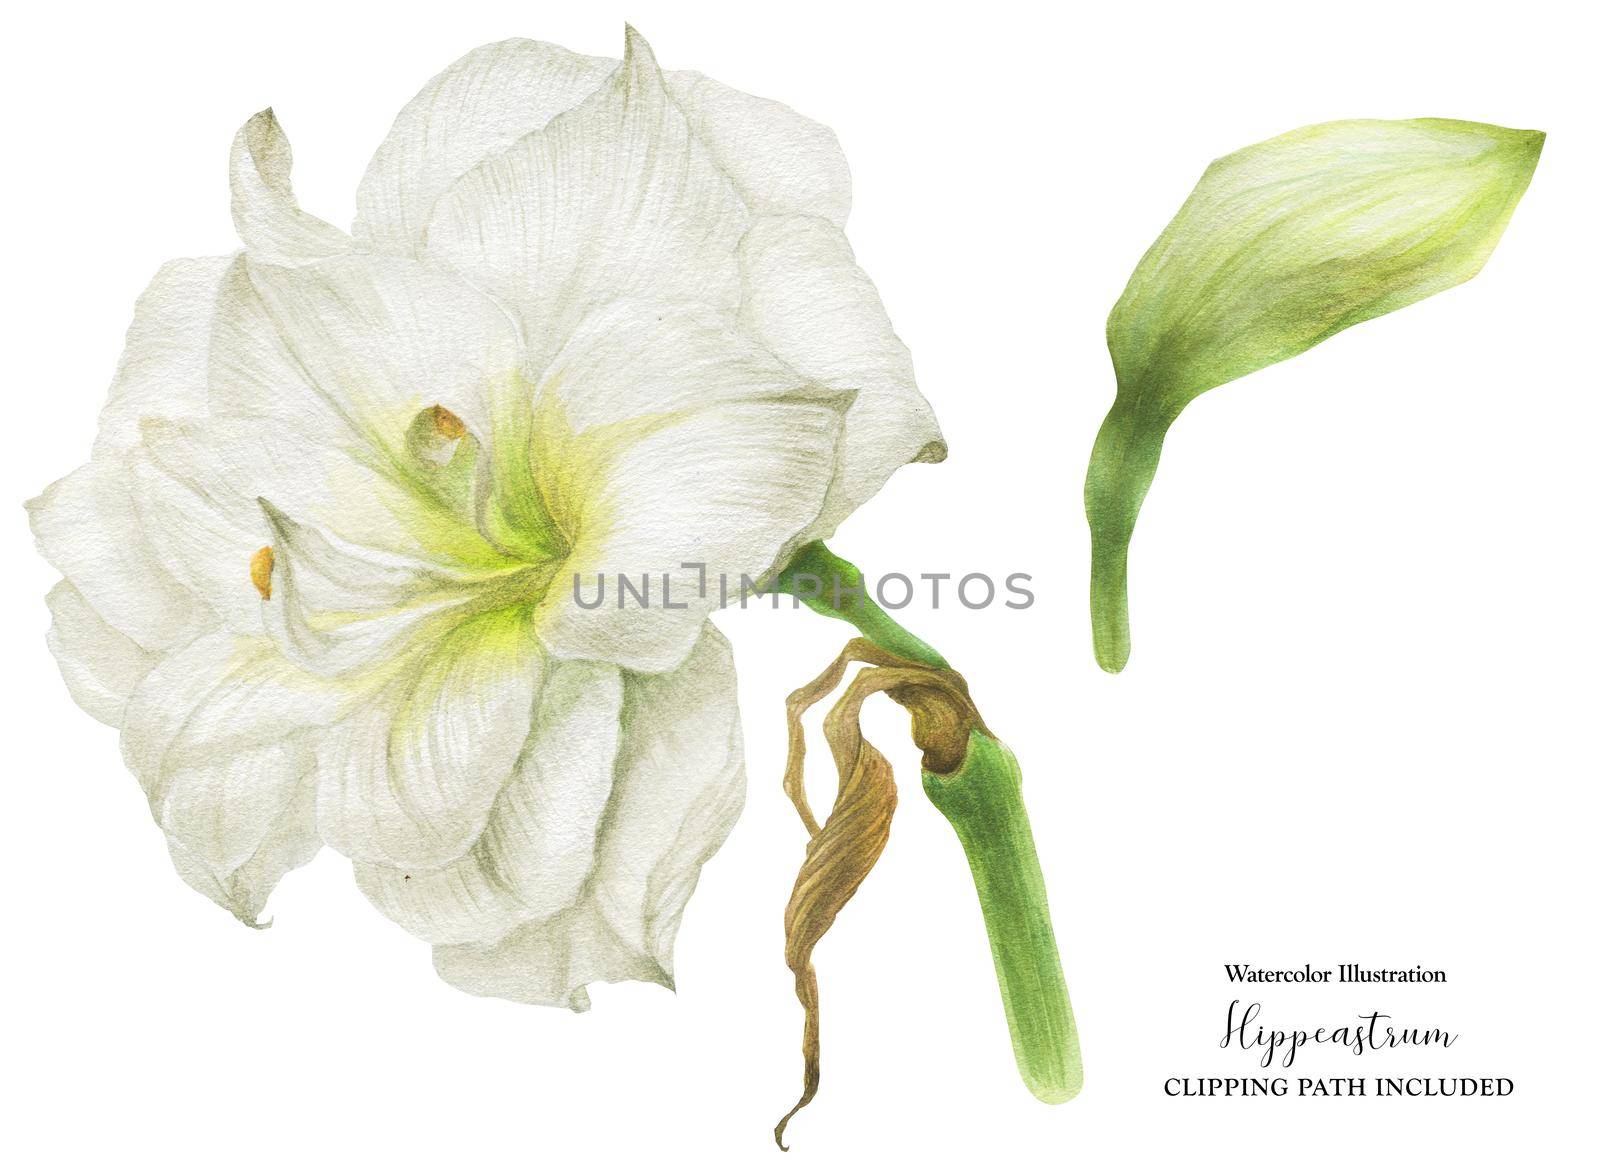 Hippeastrum flower and bud, botanical watercolor with clipping path